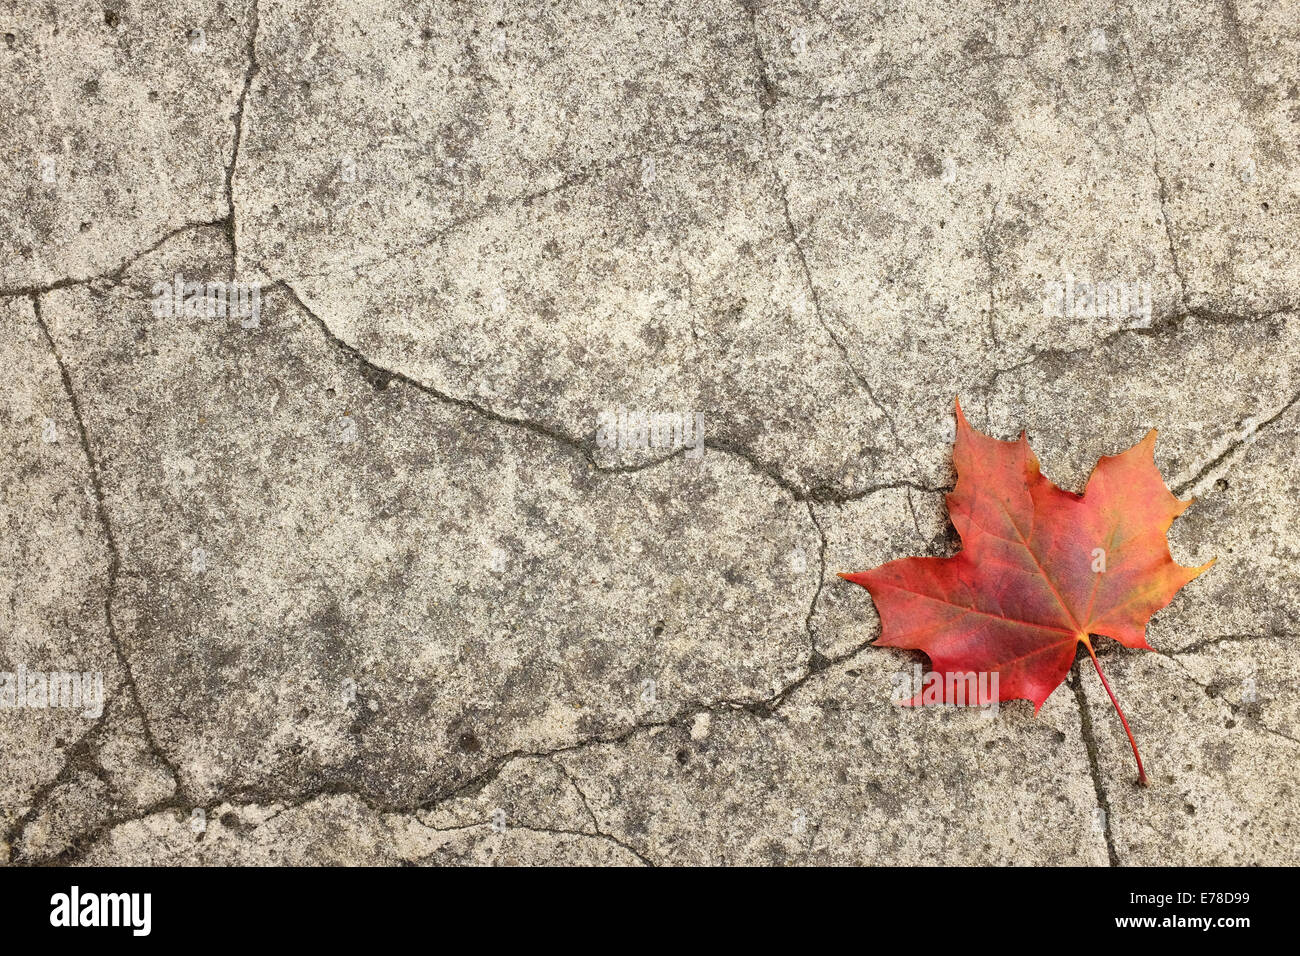 Single red fall maple leaf on an abstract cracked concrete background Stock Photo